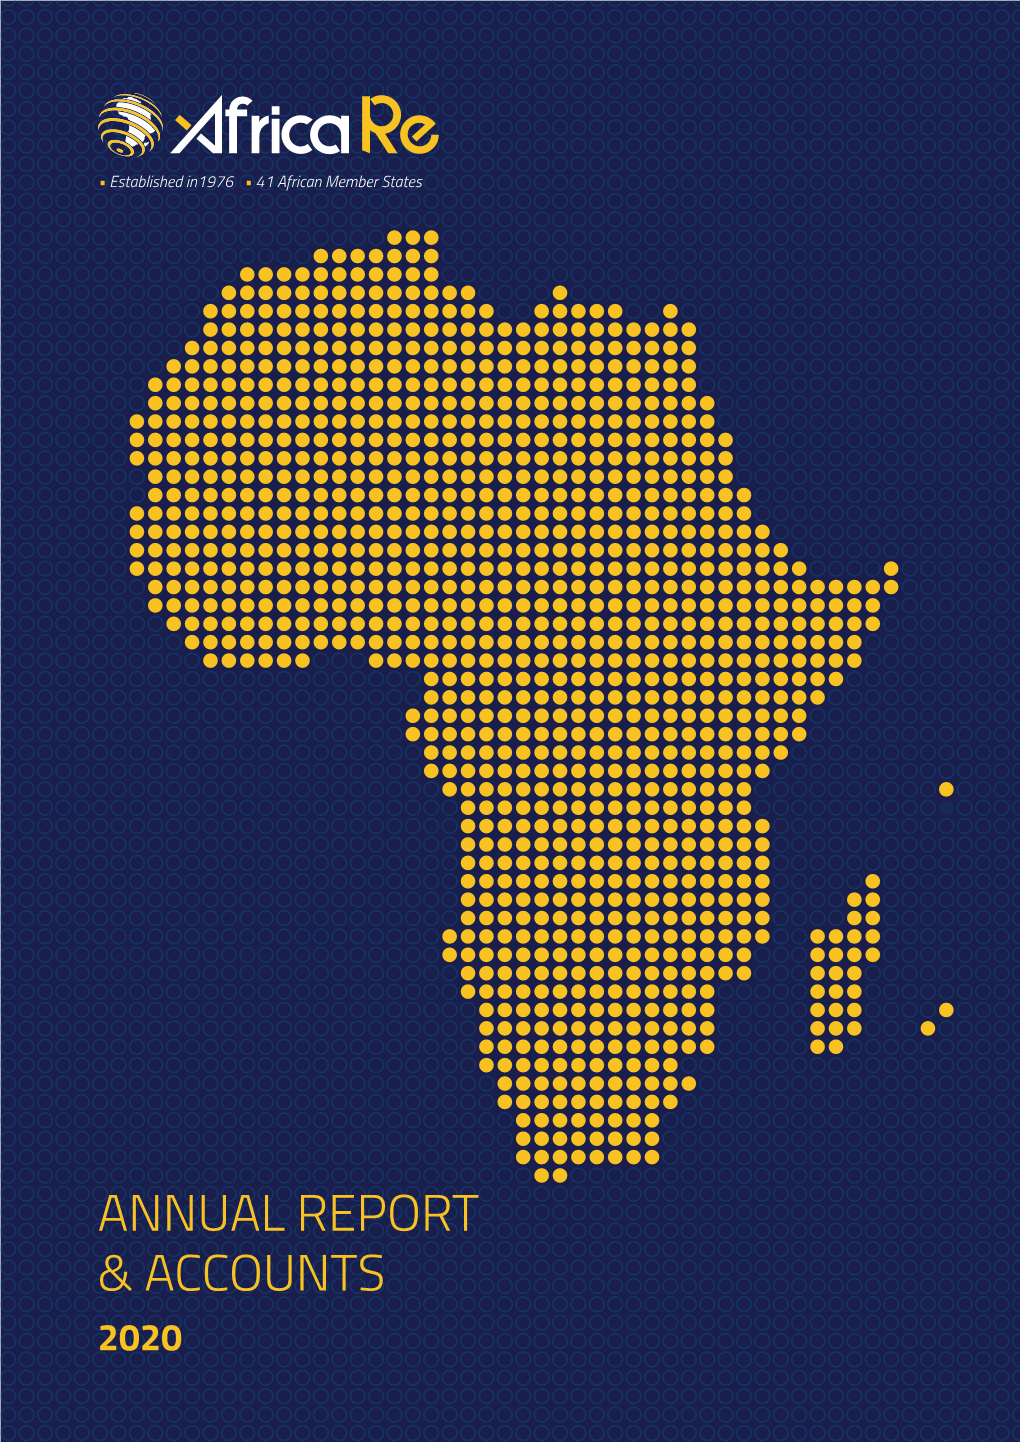 Africa Re Annual Report & Accounts 2020